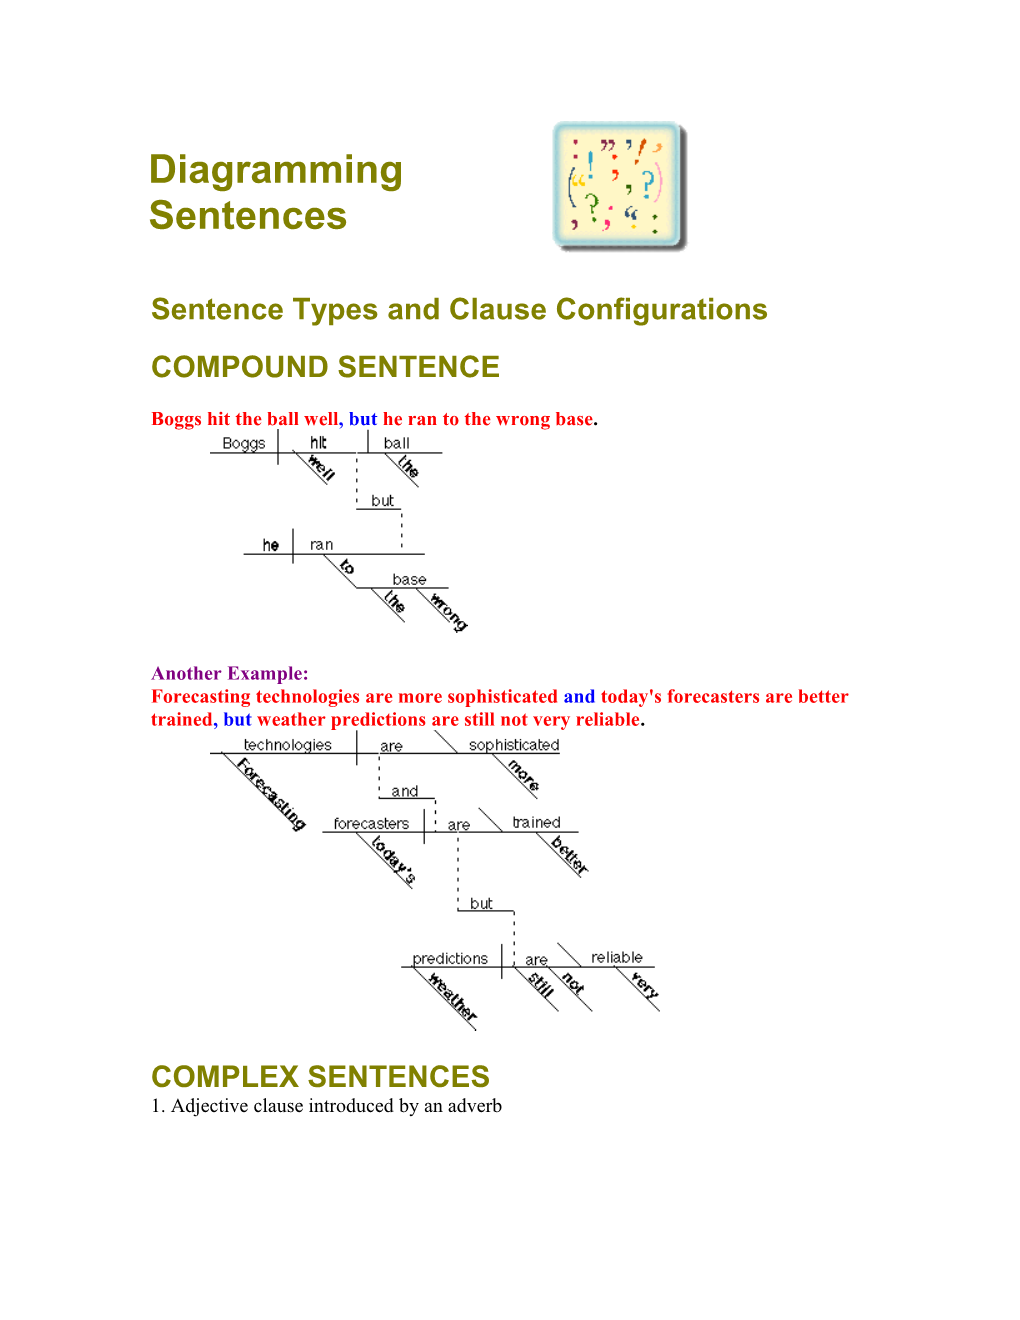 Sentence Types and Clause Configurations